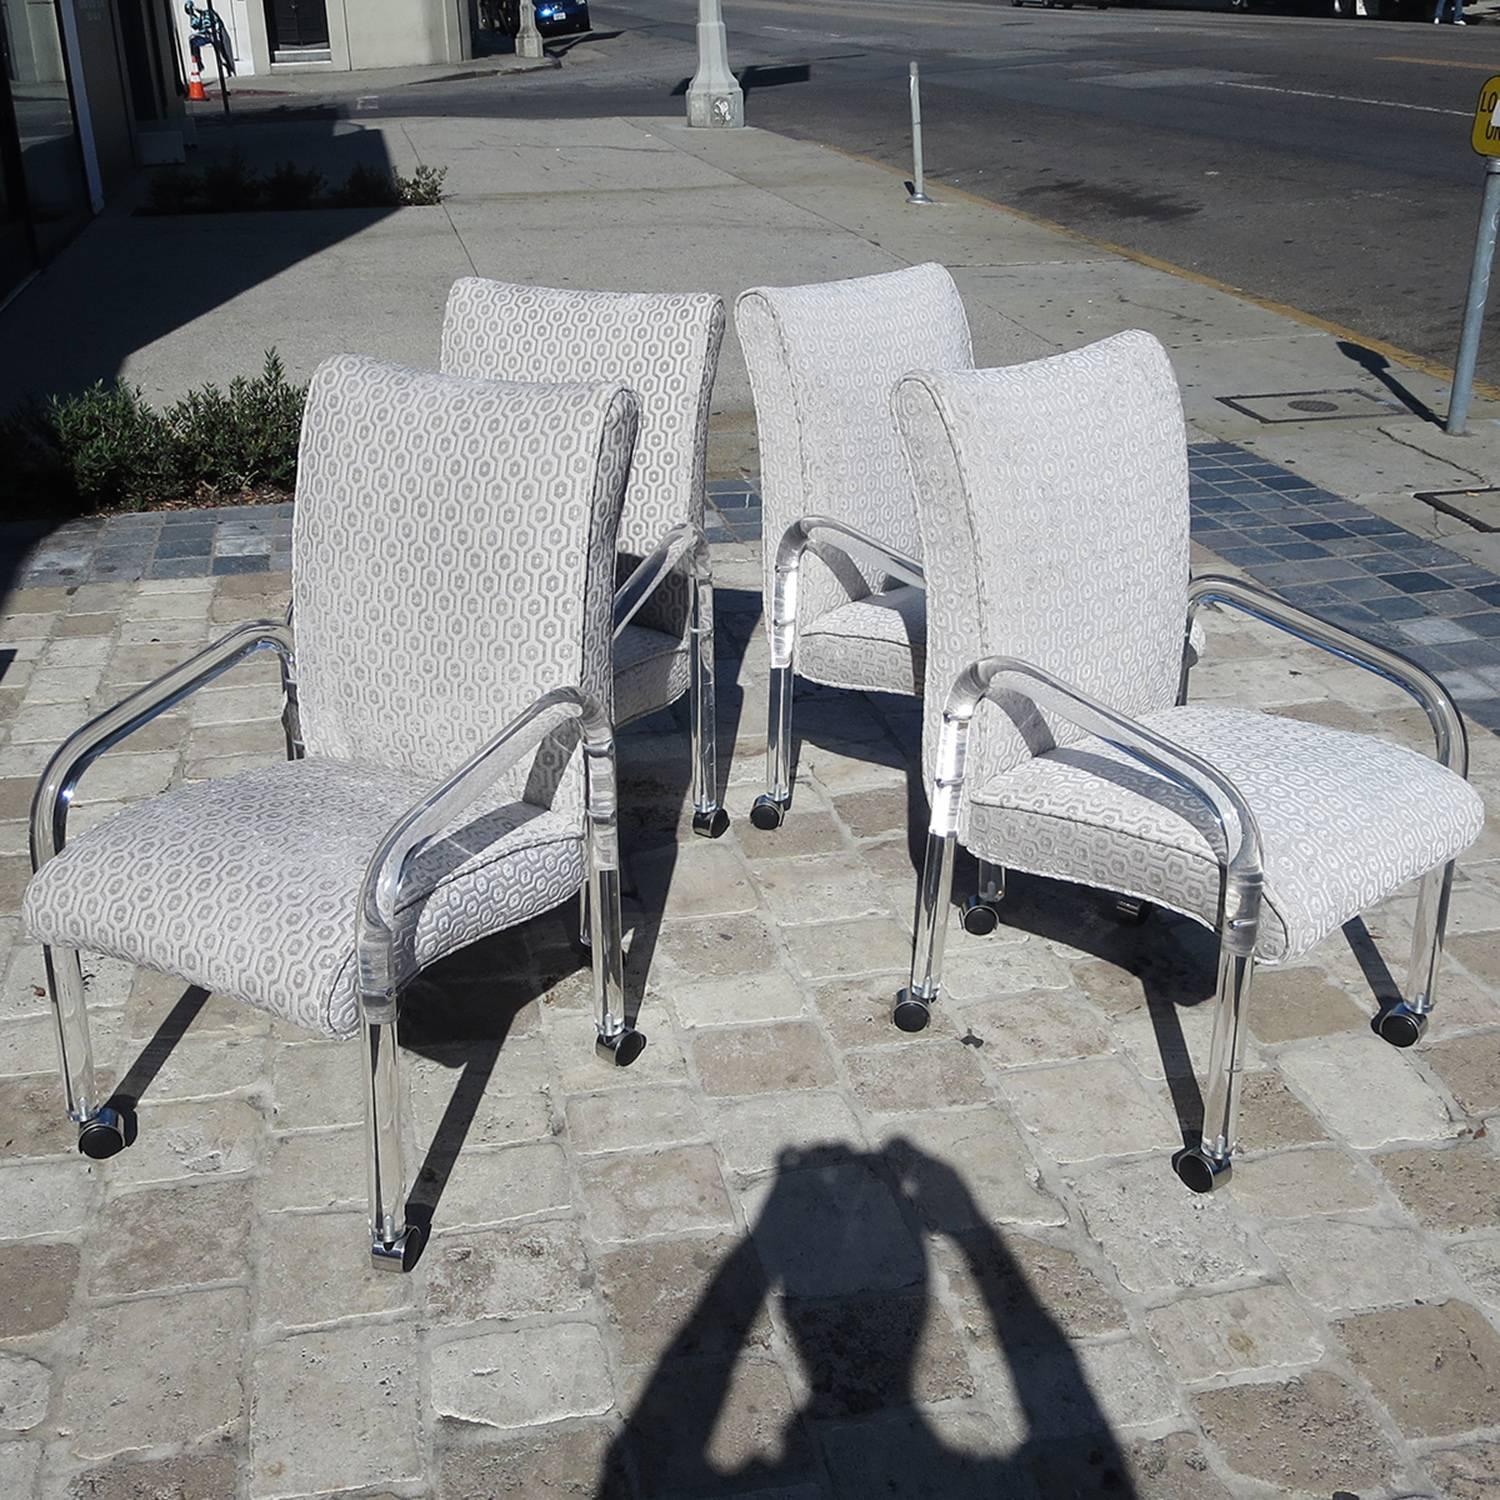 RETIREMENT SALE!!!  EVERYTHING MUST GO - CHECK OUT OUR OTHER ITEMS.

These elegant Lucite arm chairs by Pace are freshly recovered in a midcentury design textured silk velvet. They are perfect for a small dining or game table. The Lucite is in